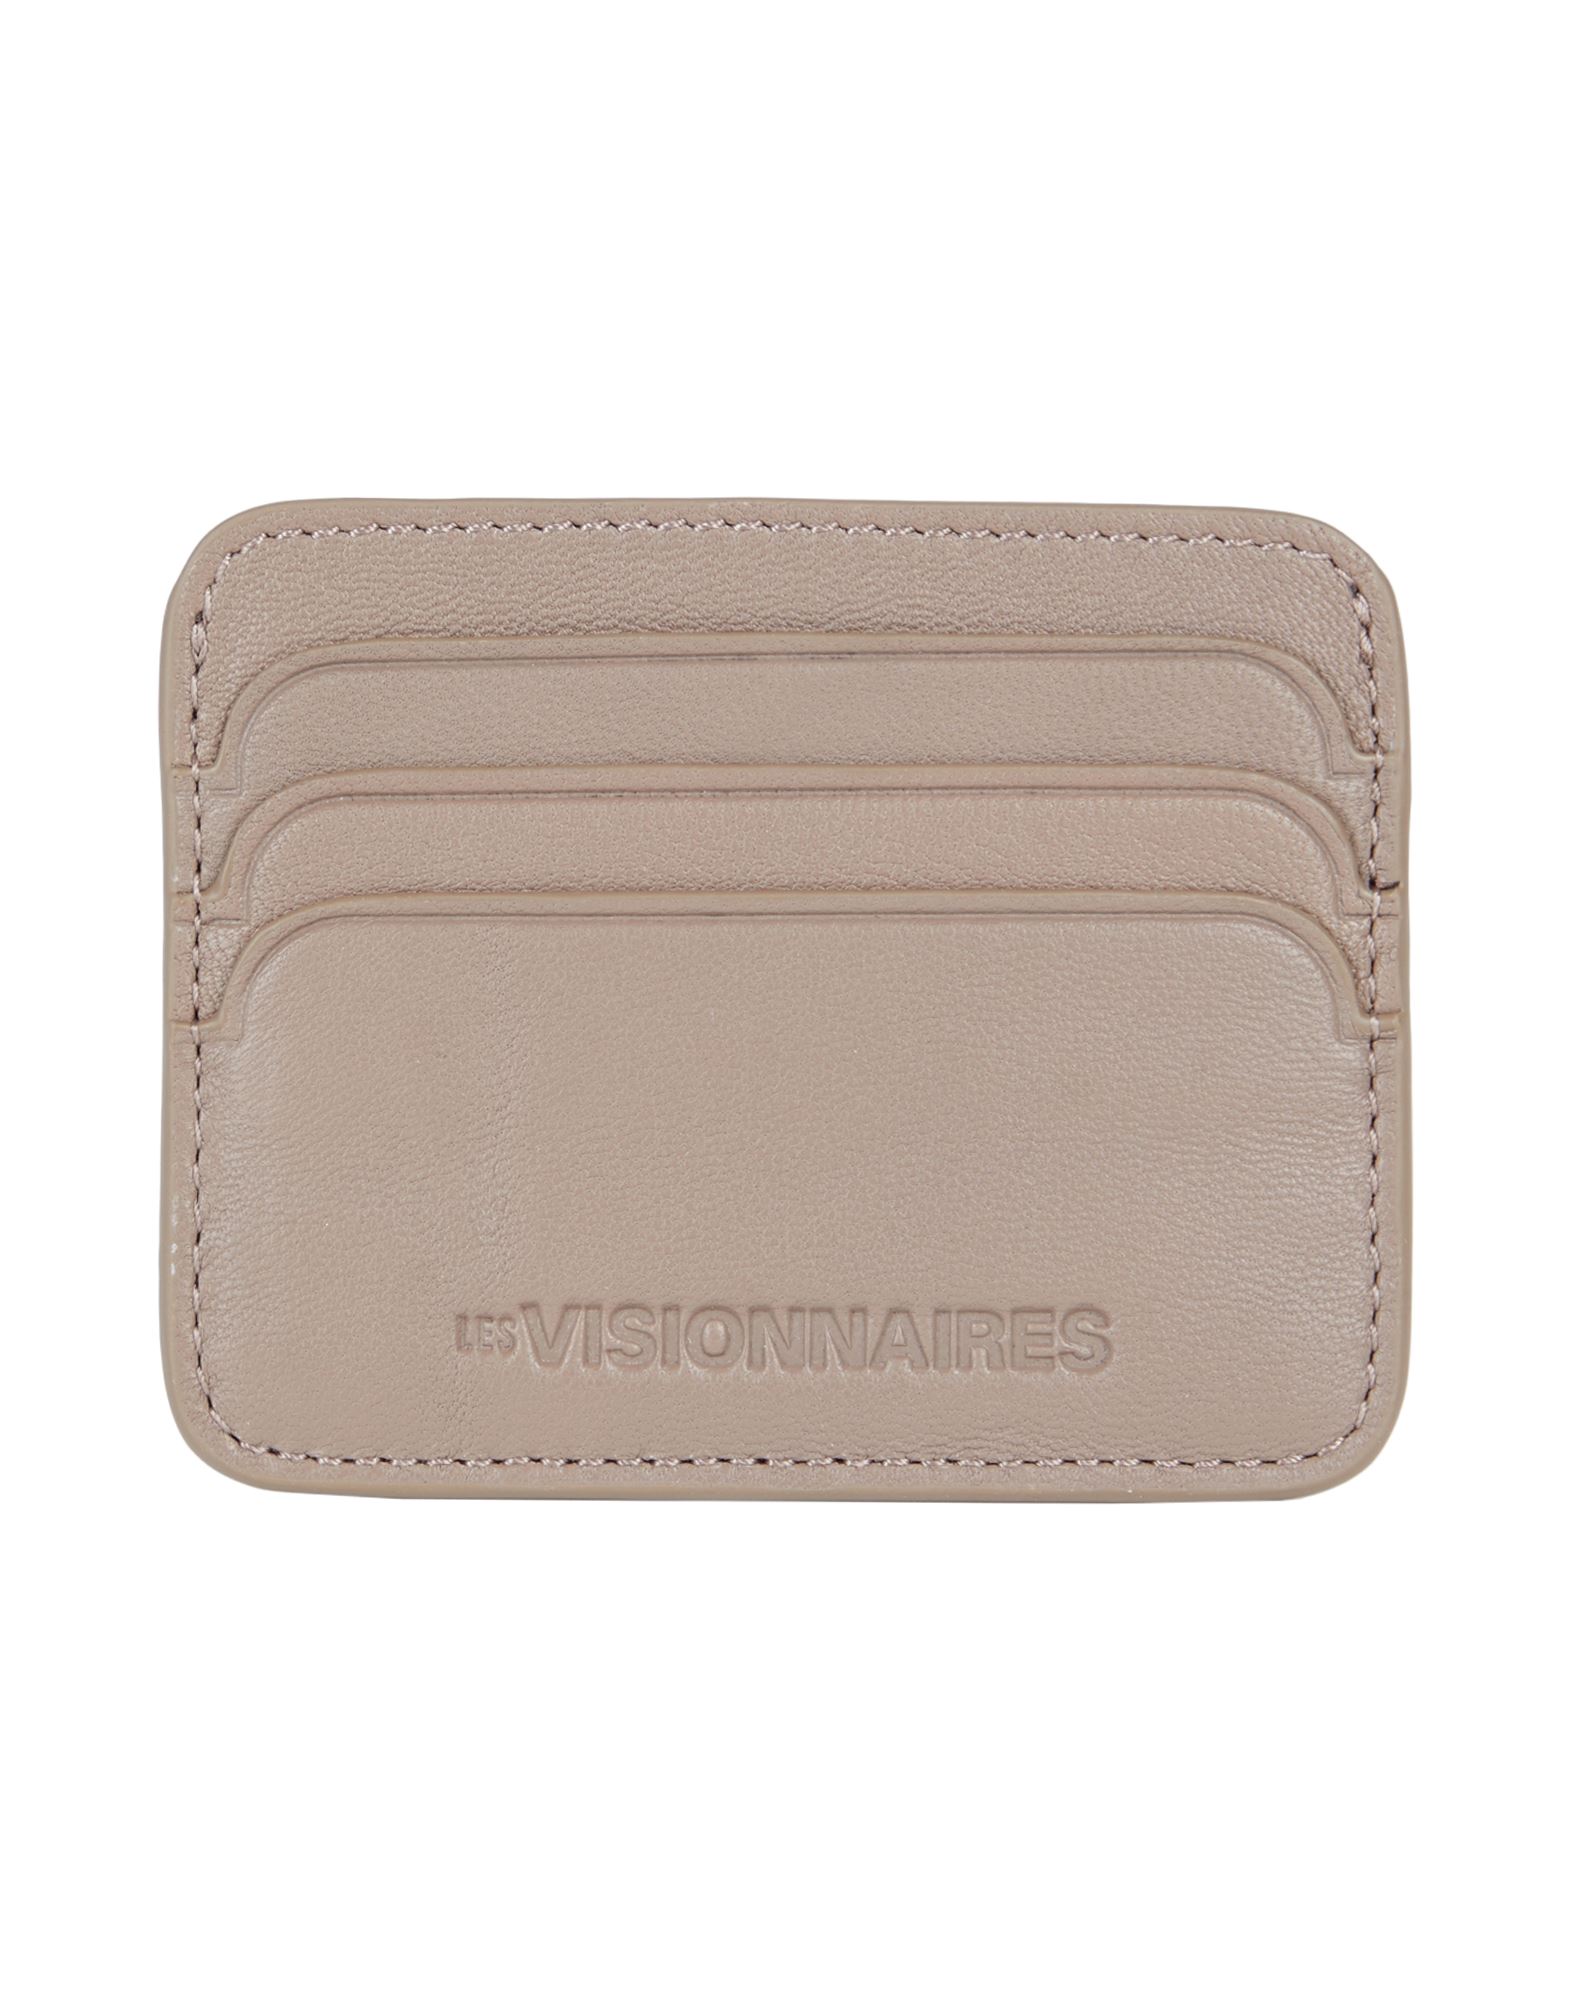 Les Visionnaires Document Holders In Grey